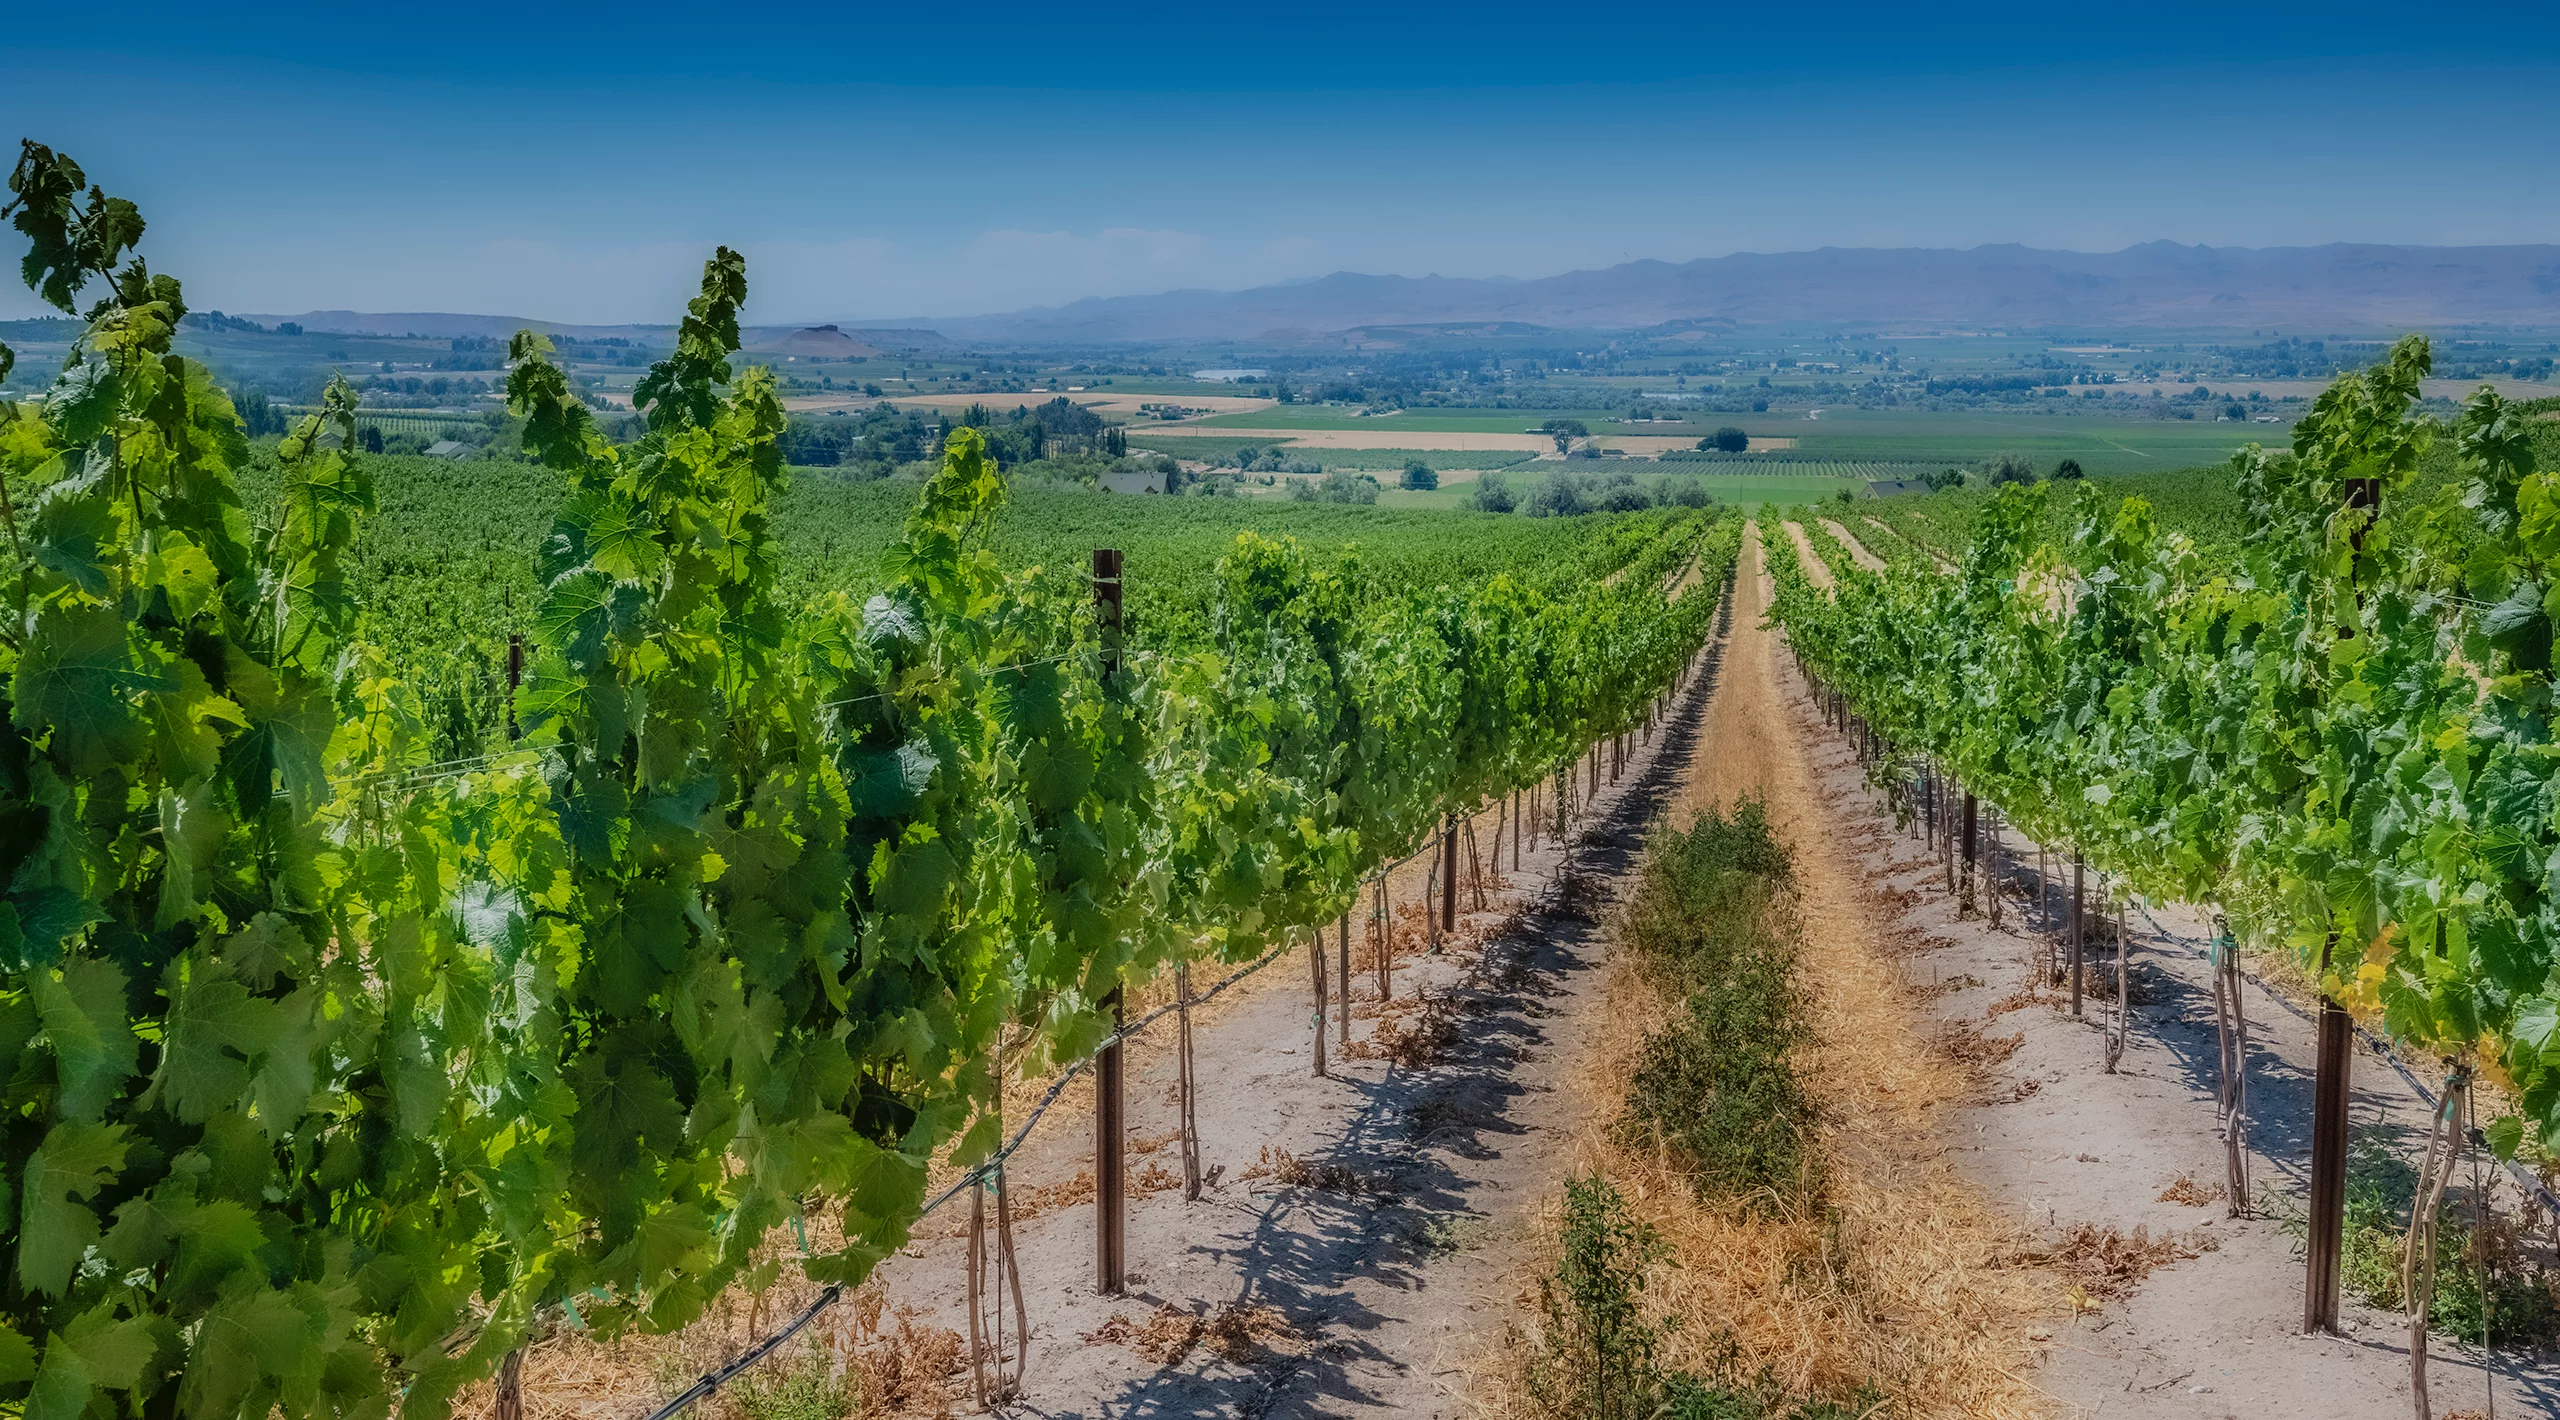 View in foreground down a row of grapevines in a vineyard; mountains in the background